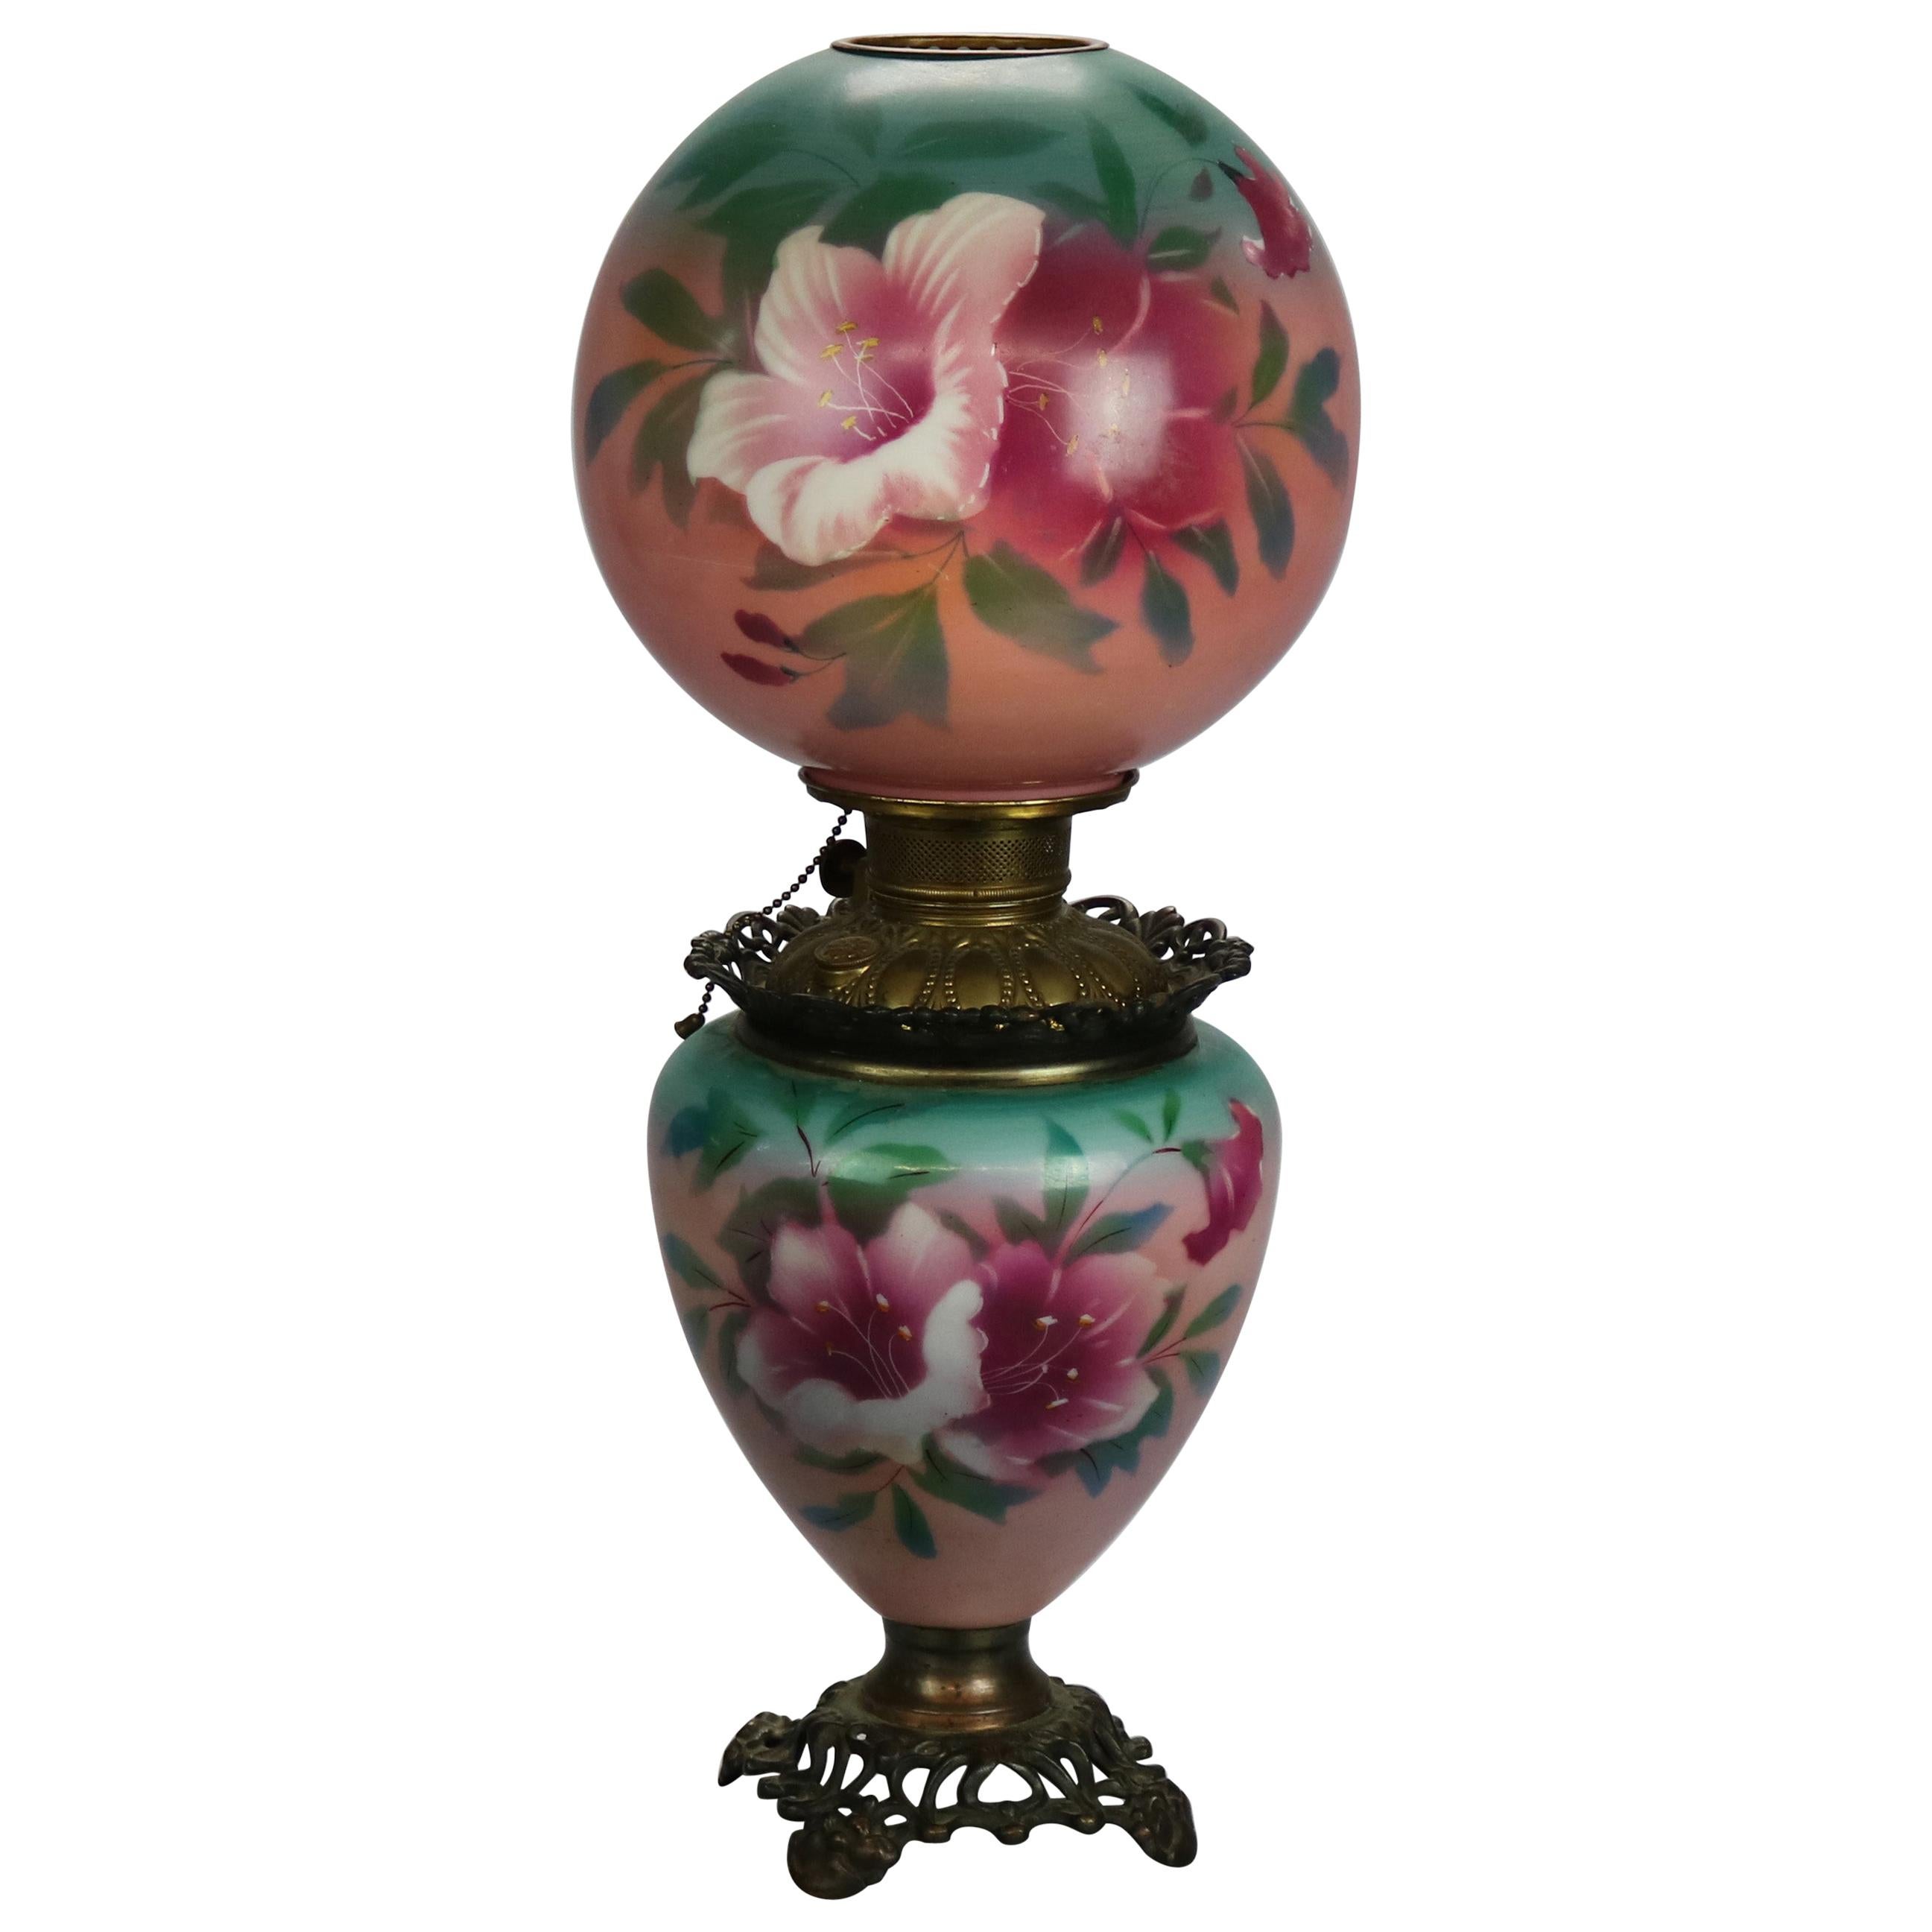 Antique Dual Wick Oil Lamp, Handpainted Floral, Circa 1890s - Ruby Lane